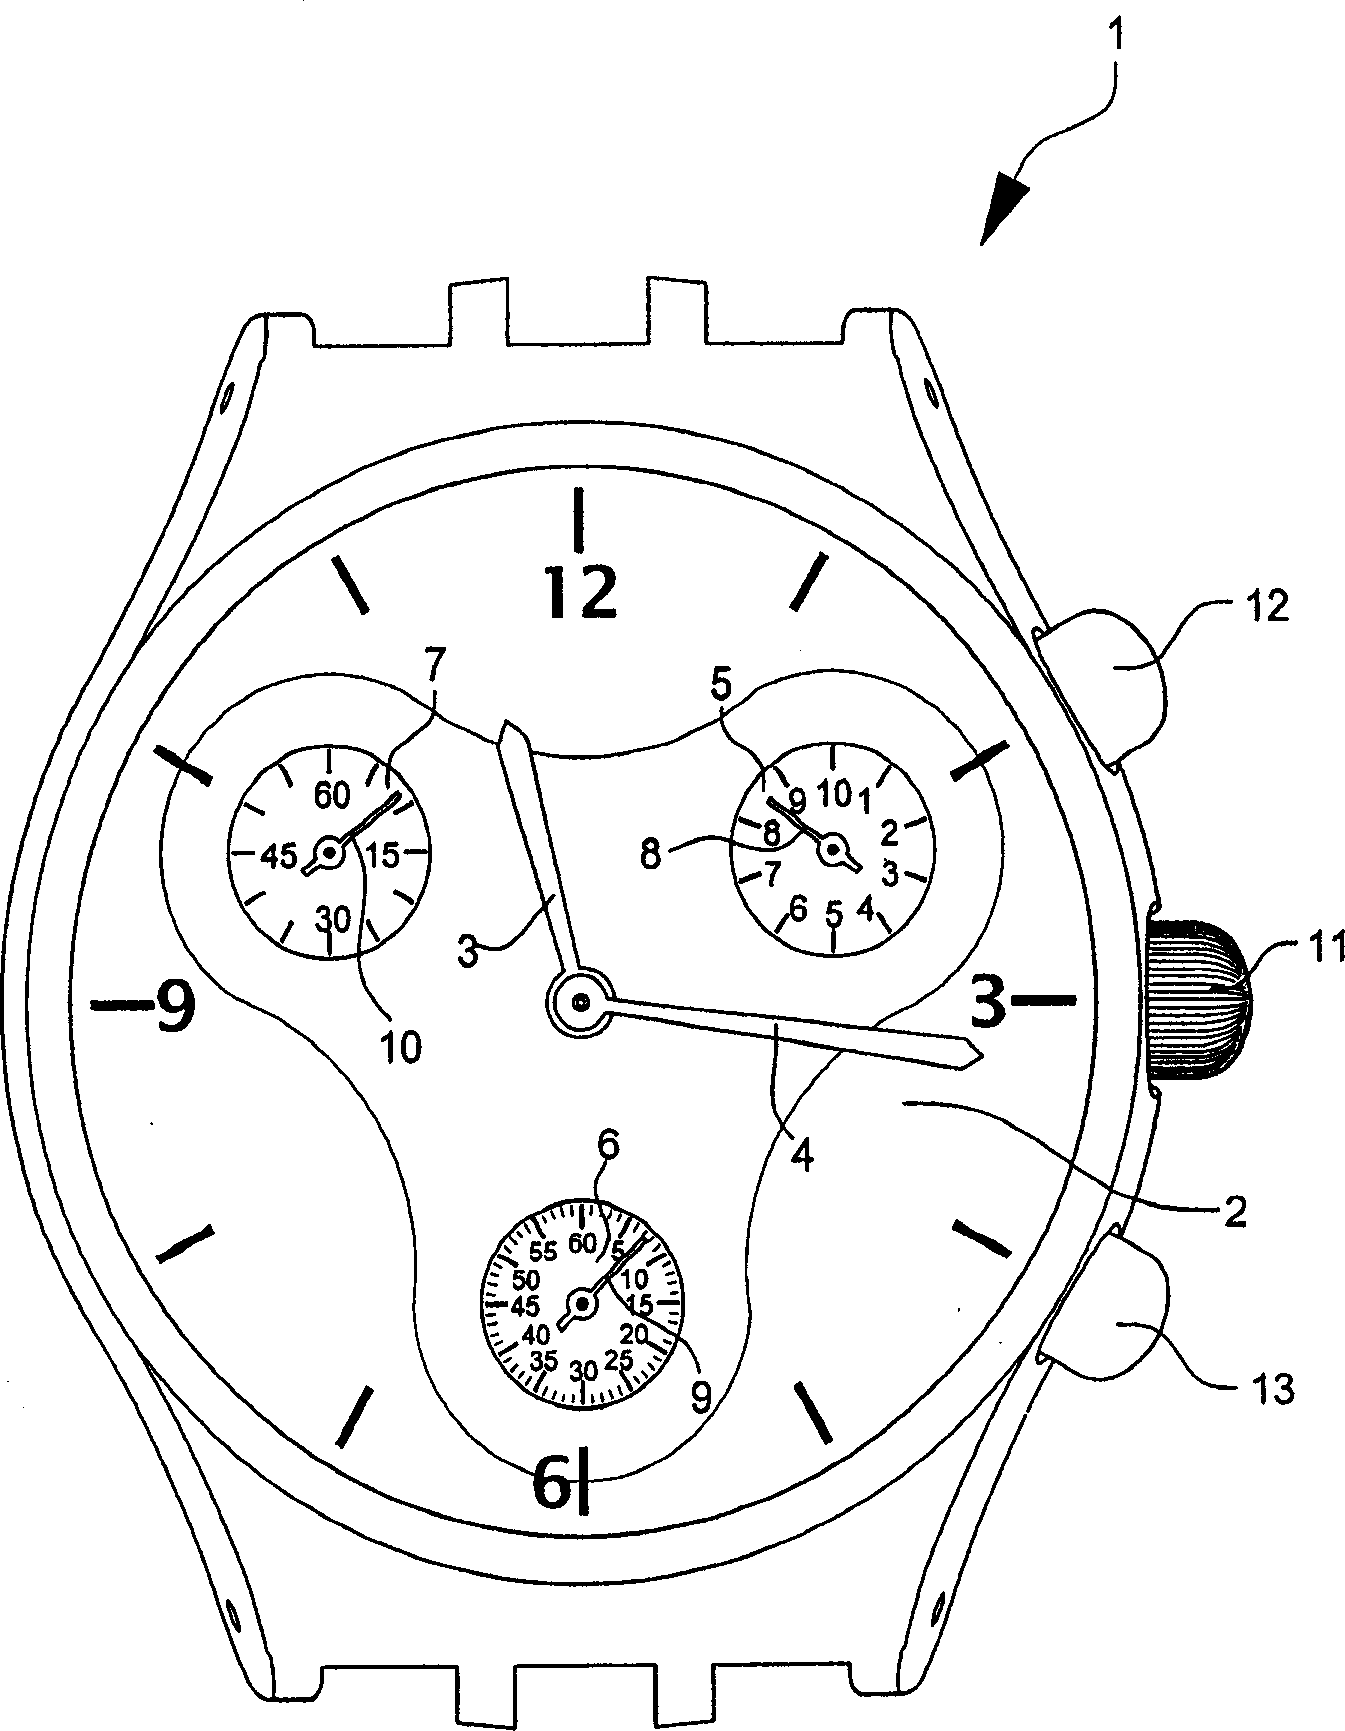 Precise electronic watch with analog display